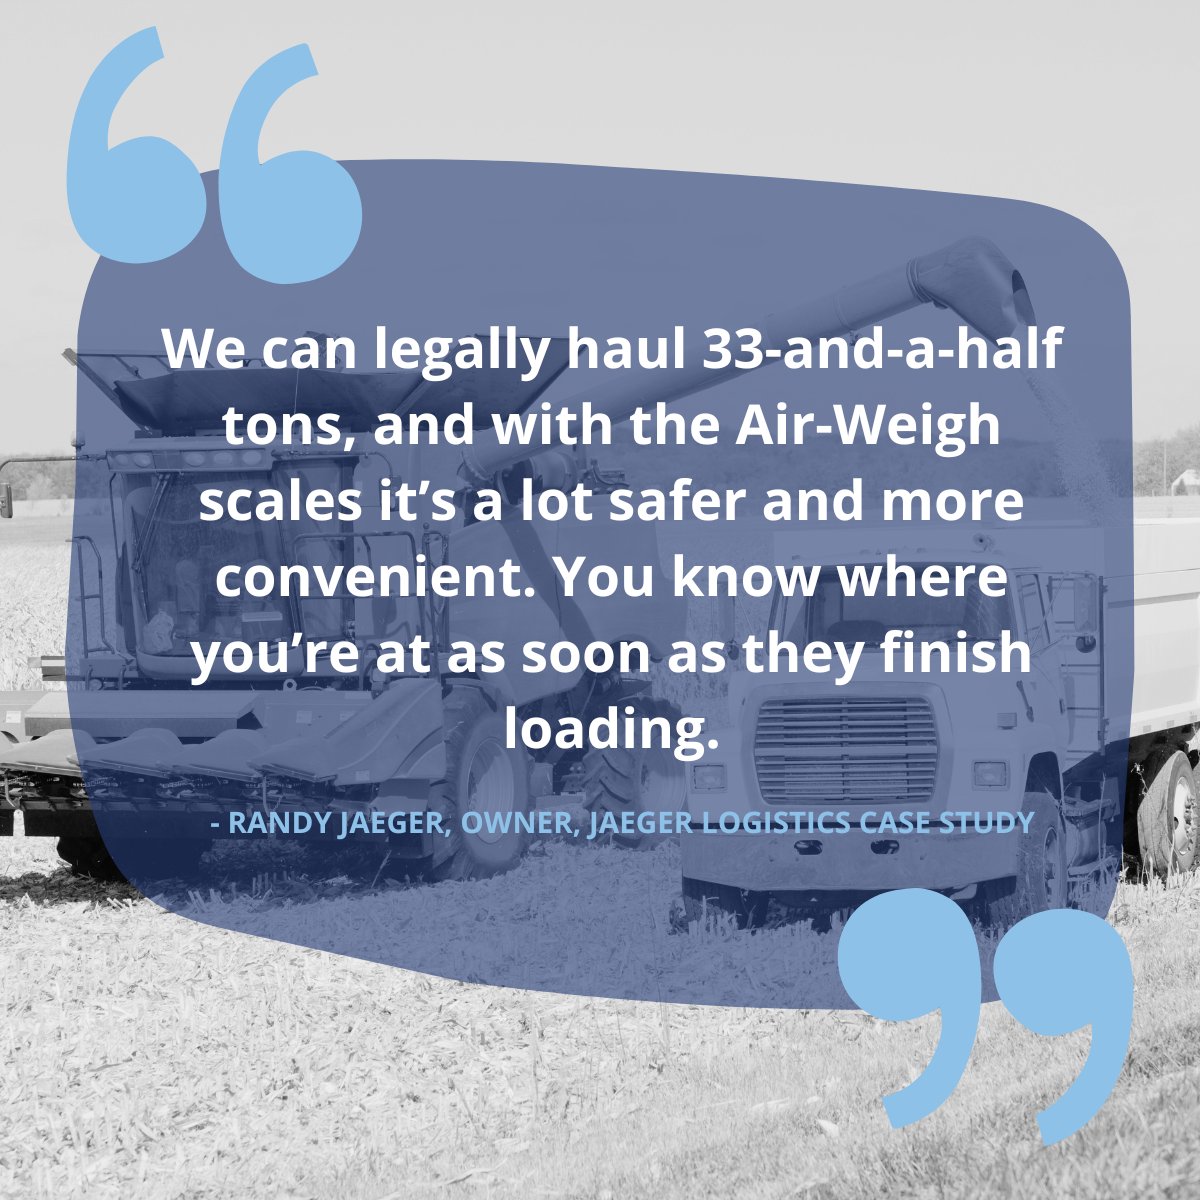 On-board scales ‘changed everything’ for this North Dakota grain hauler. Read further on how on-board scales paid for itself in saved time here: air-weigh.com/case-study-jae… #CaseStudy #Grainhauler